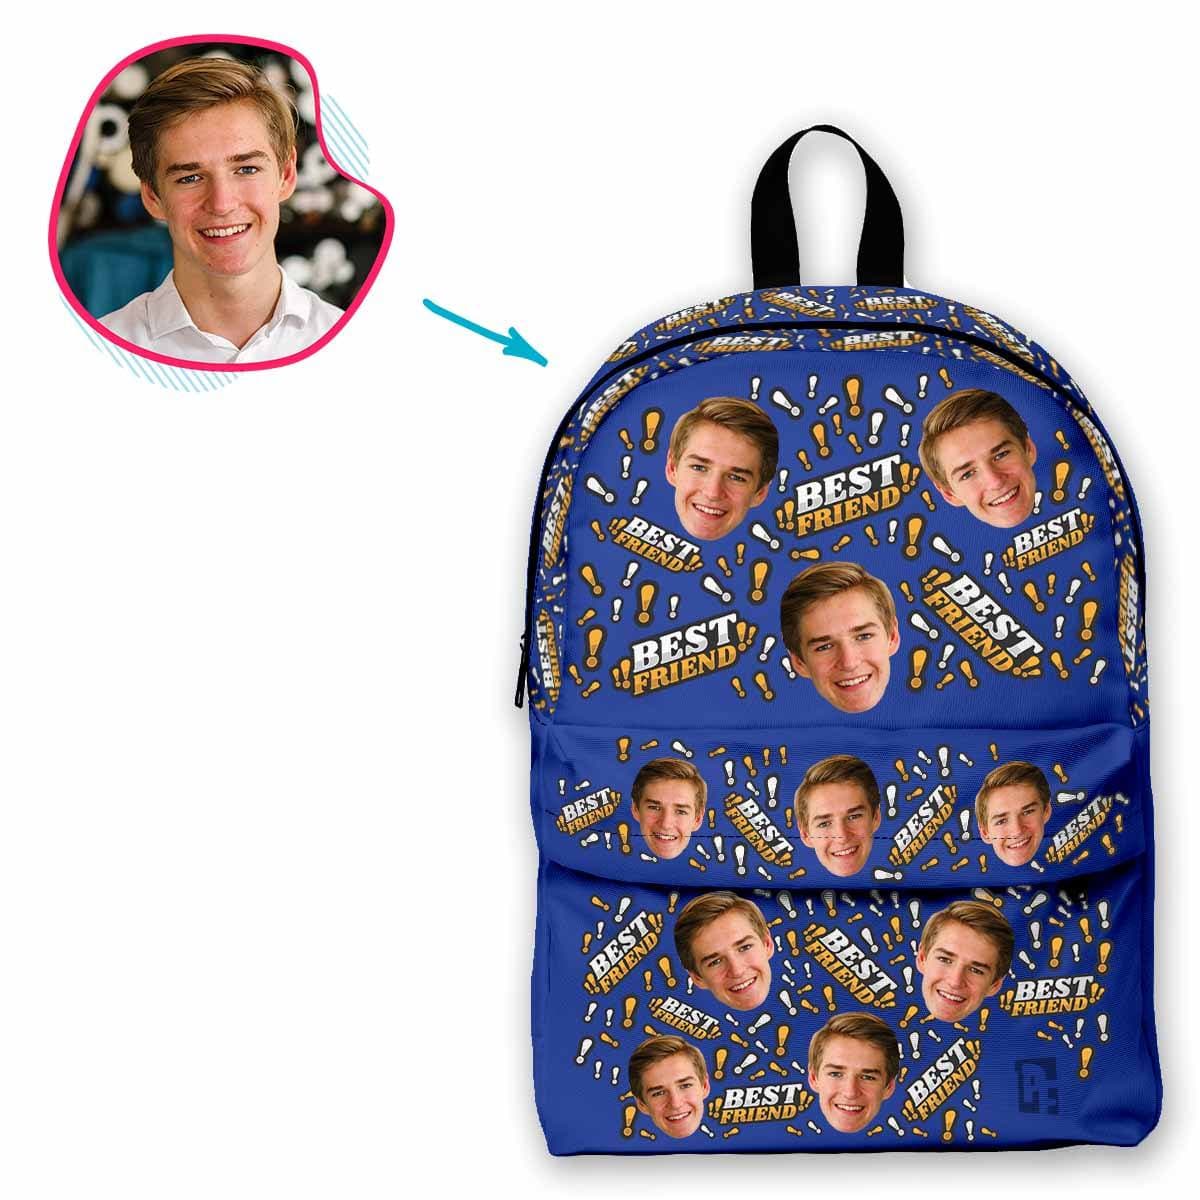 darkblue Best Friend classic backpack personalized with photo of face printed on it